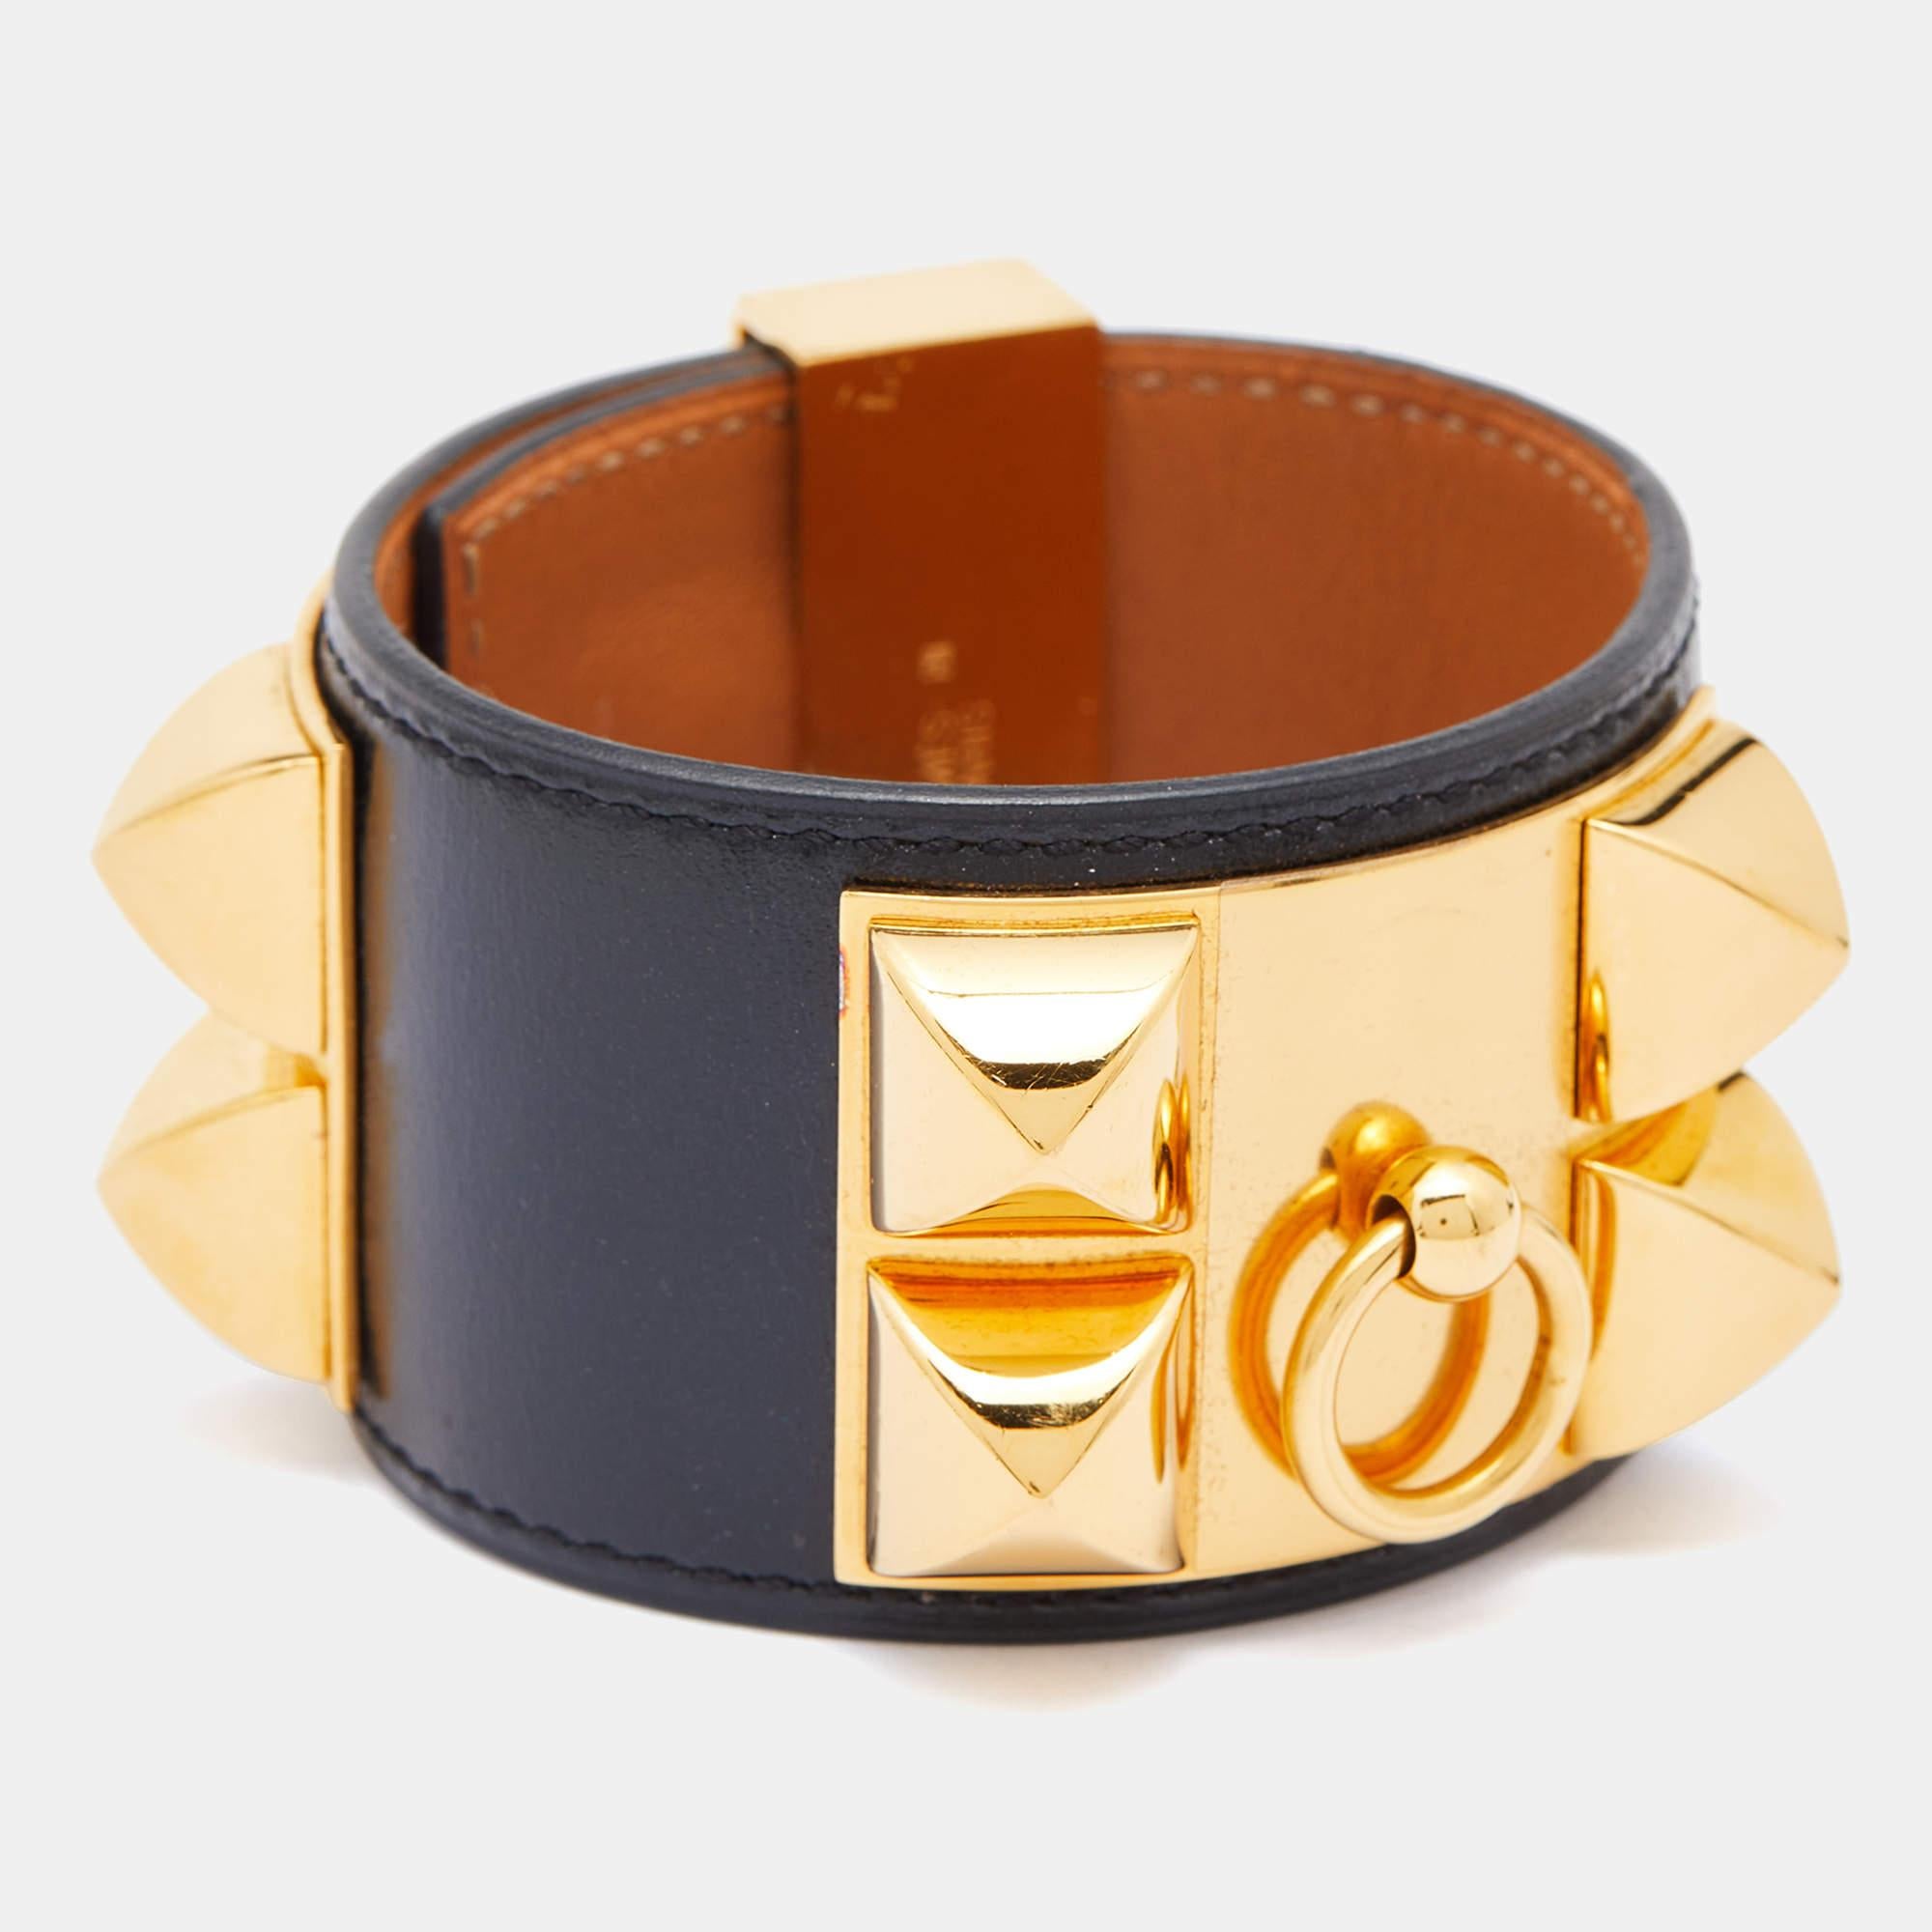 Exuding a downtown, punk vibe, this instantly recognizable bracelet is from the signature Collier de Chien collection of Hermès. The bracelet, made of leather, is adorned with the iconic Collier de Chien motif in gold-plated metal featuring pyramid